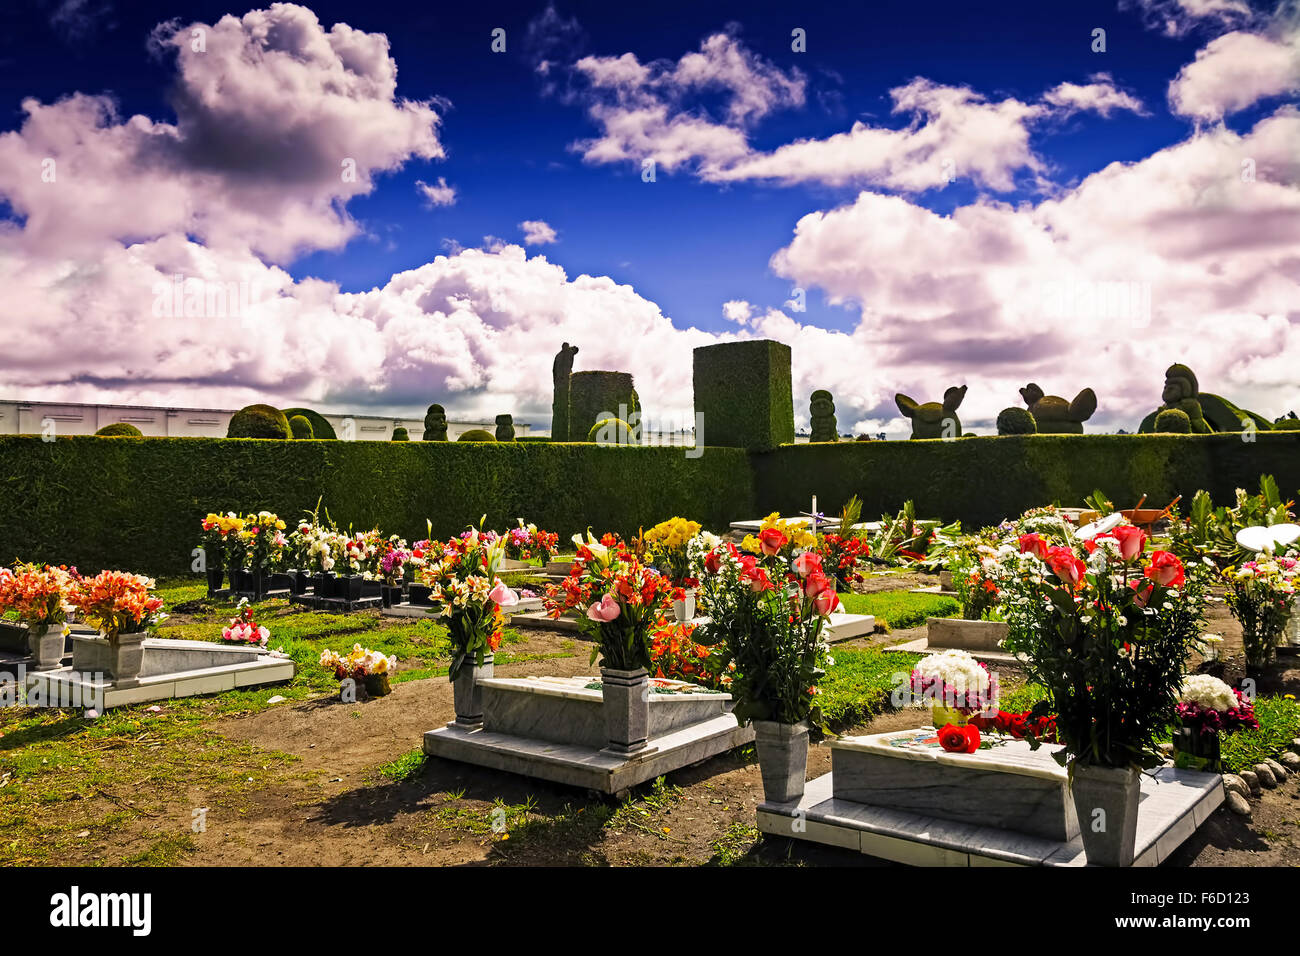 Groomed Graves In The Cemetery In Tulcan, Located Right On The Border Between Ecuador And Colombia Stock Photo